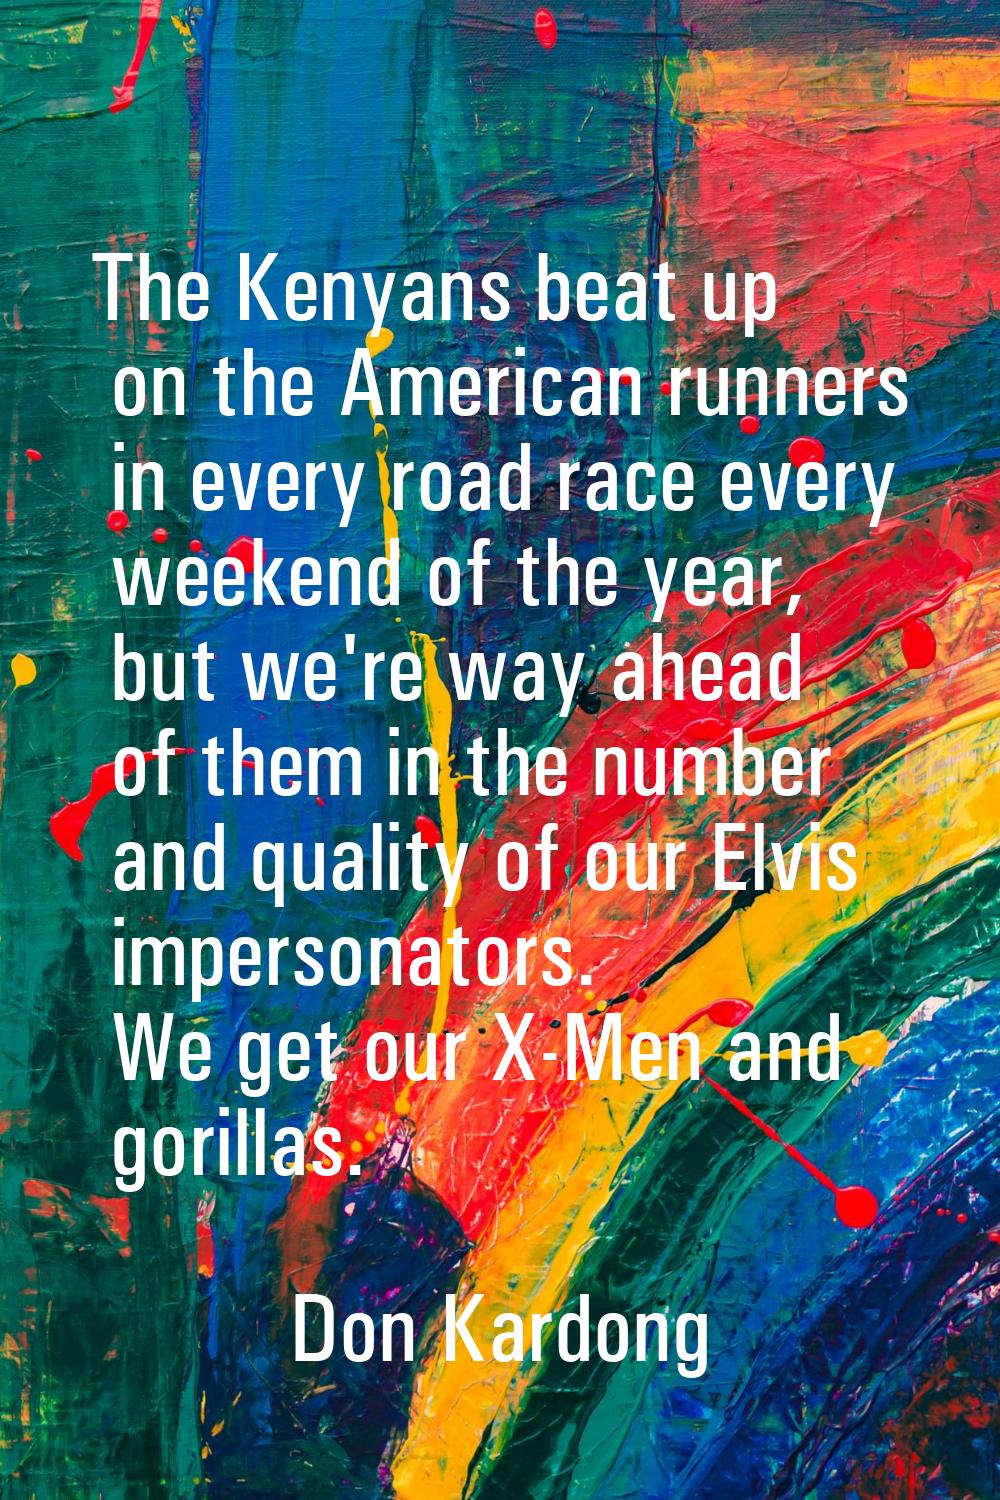 The Kenyans beat up on the American runners in every road race every weekend of the year, but we're